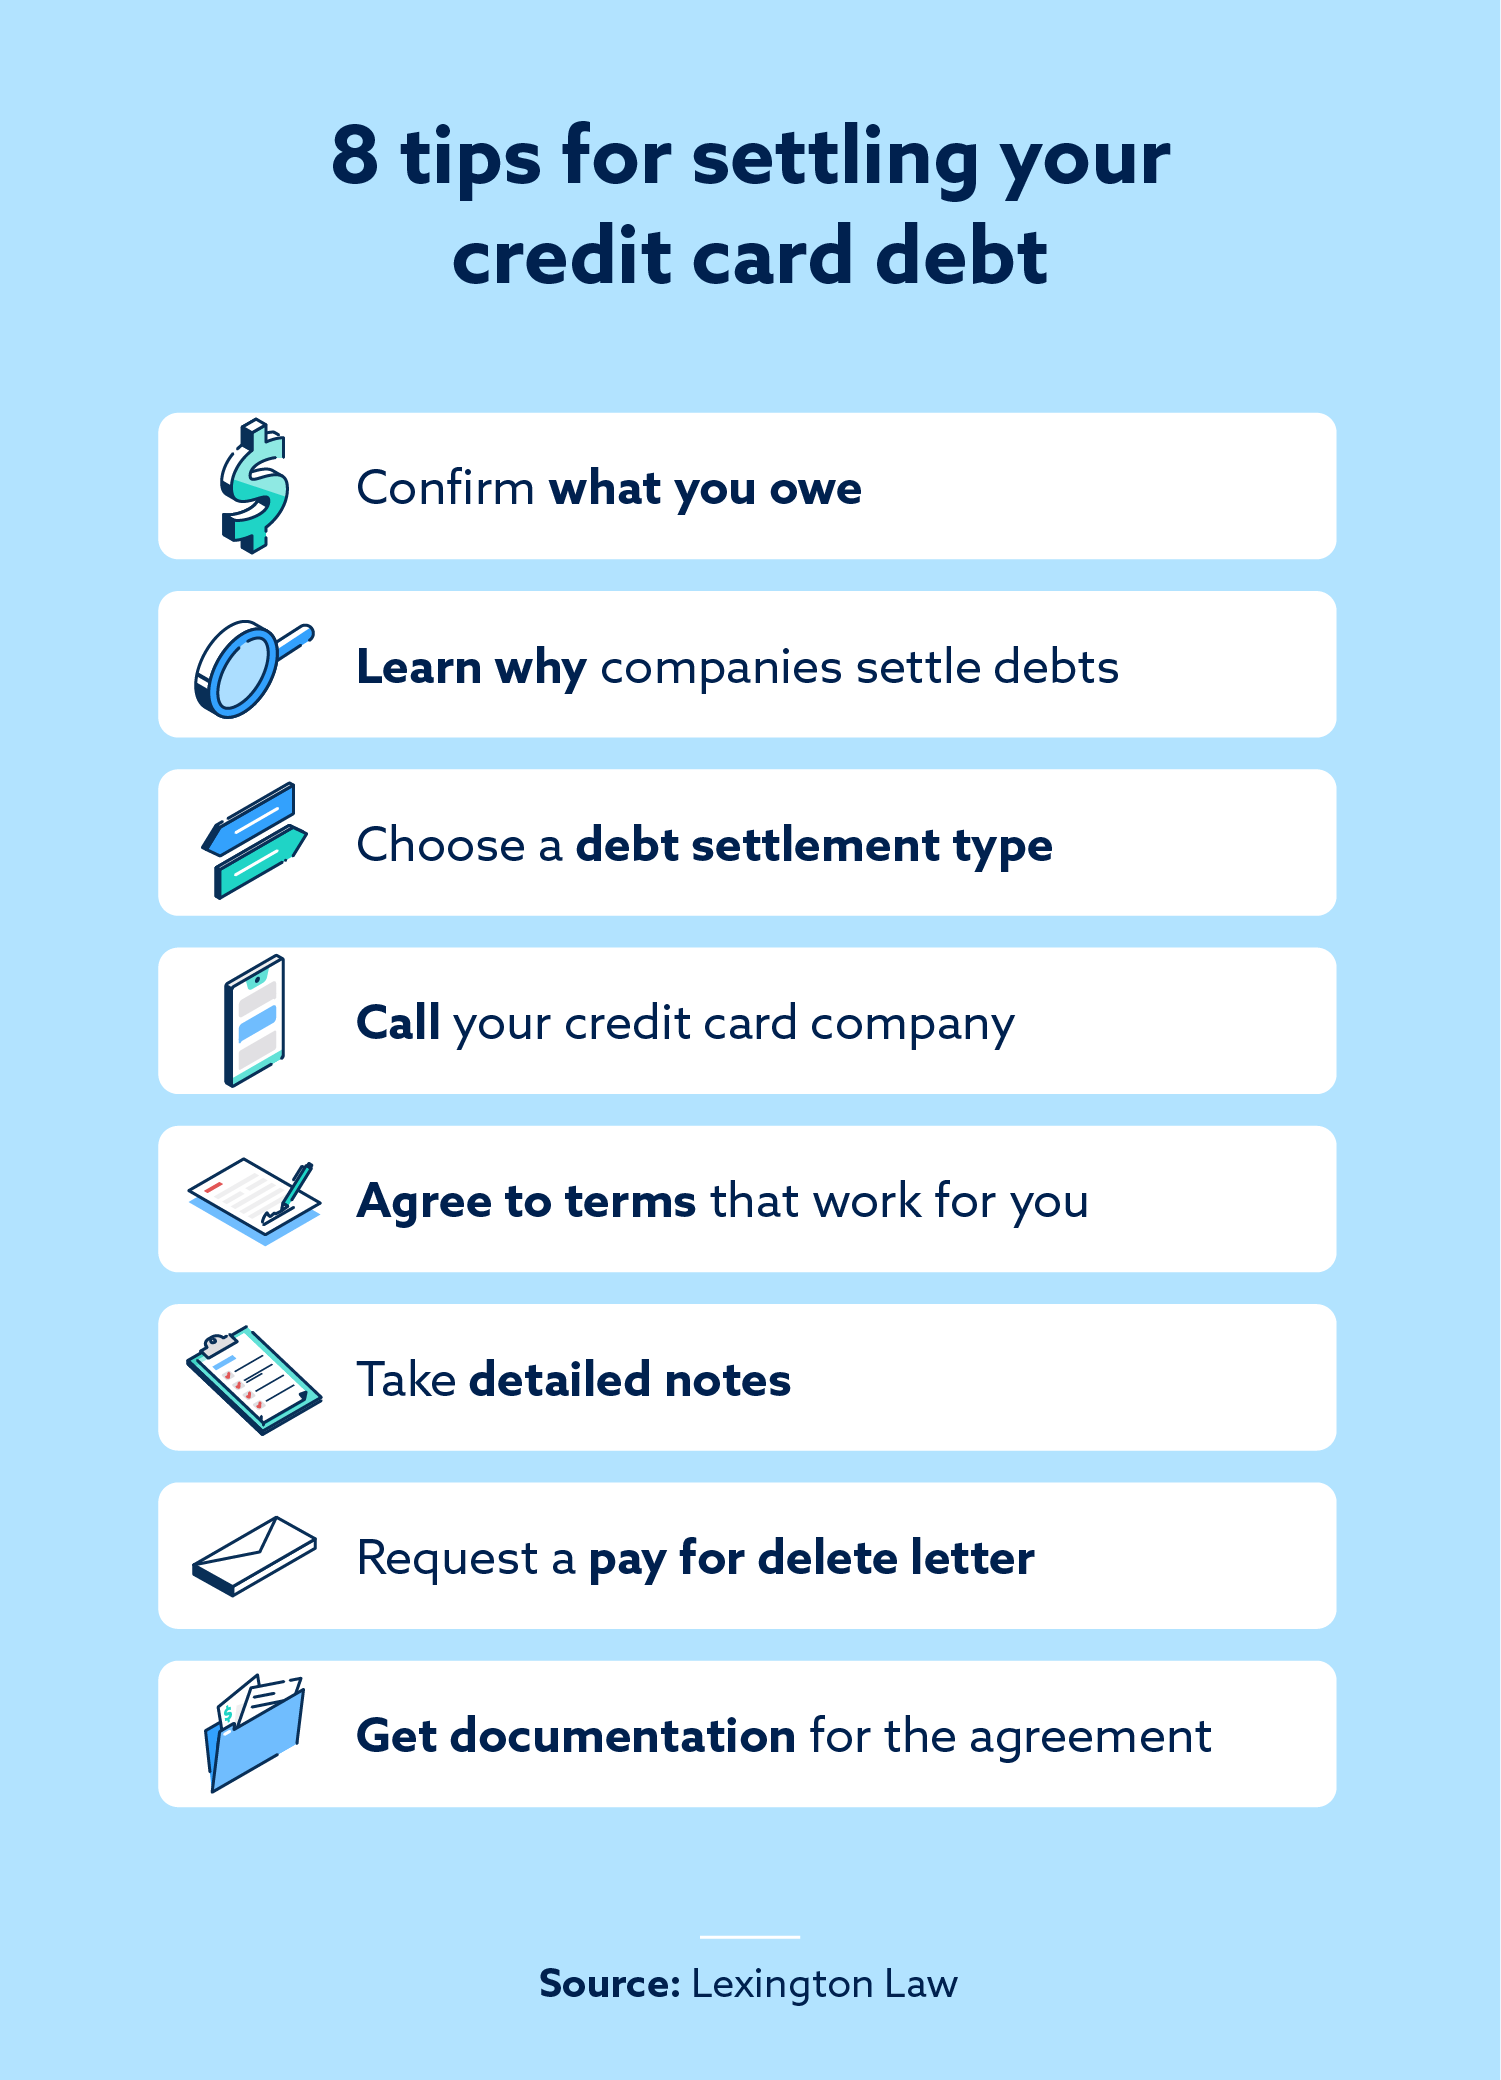 Debt negotiation and settlement tips